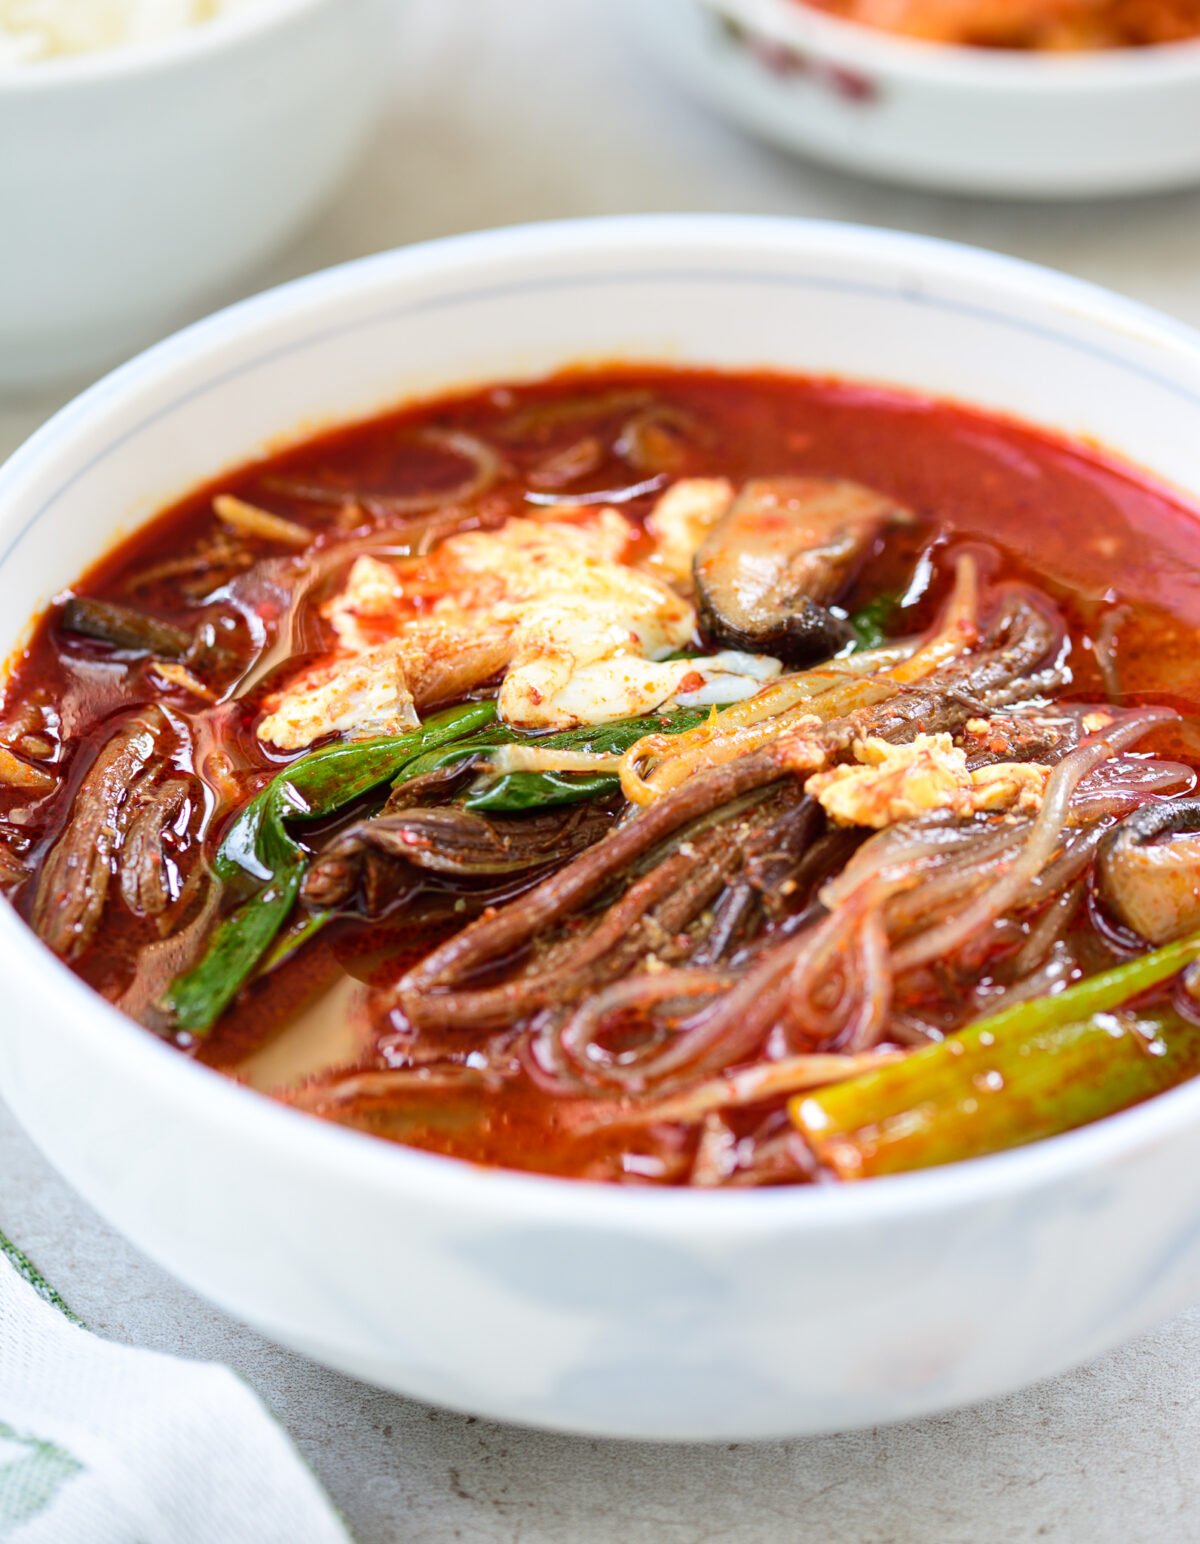 DSC4727 e1649036655548 - Yukgaejang (Spicy Beef Soup with Vegetables)